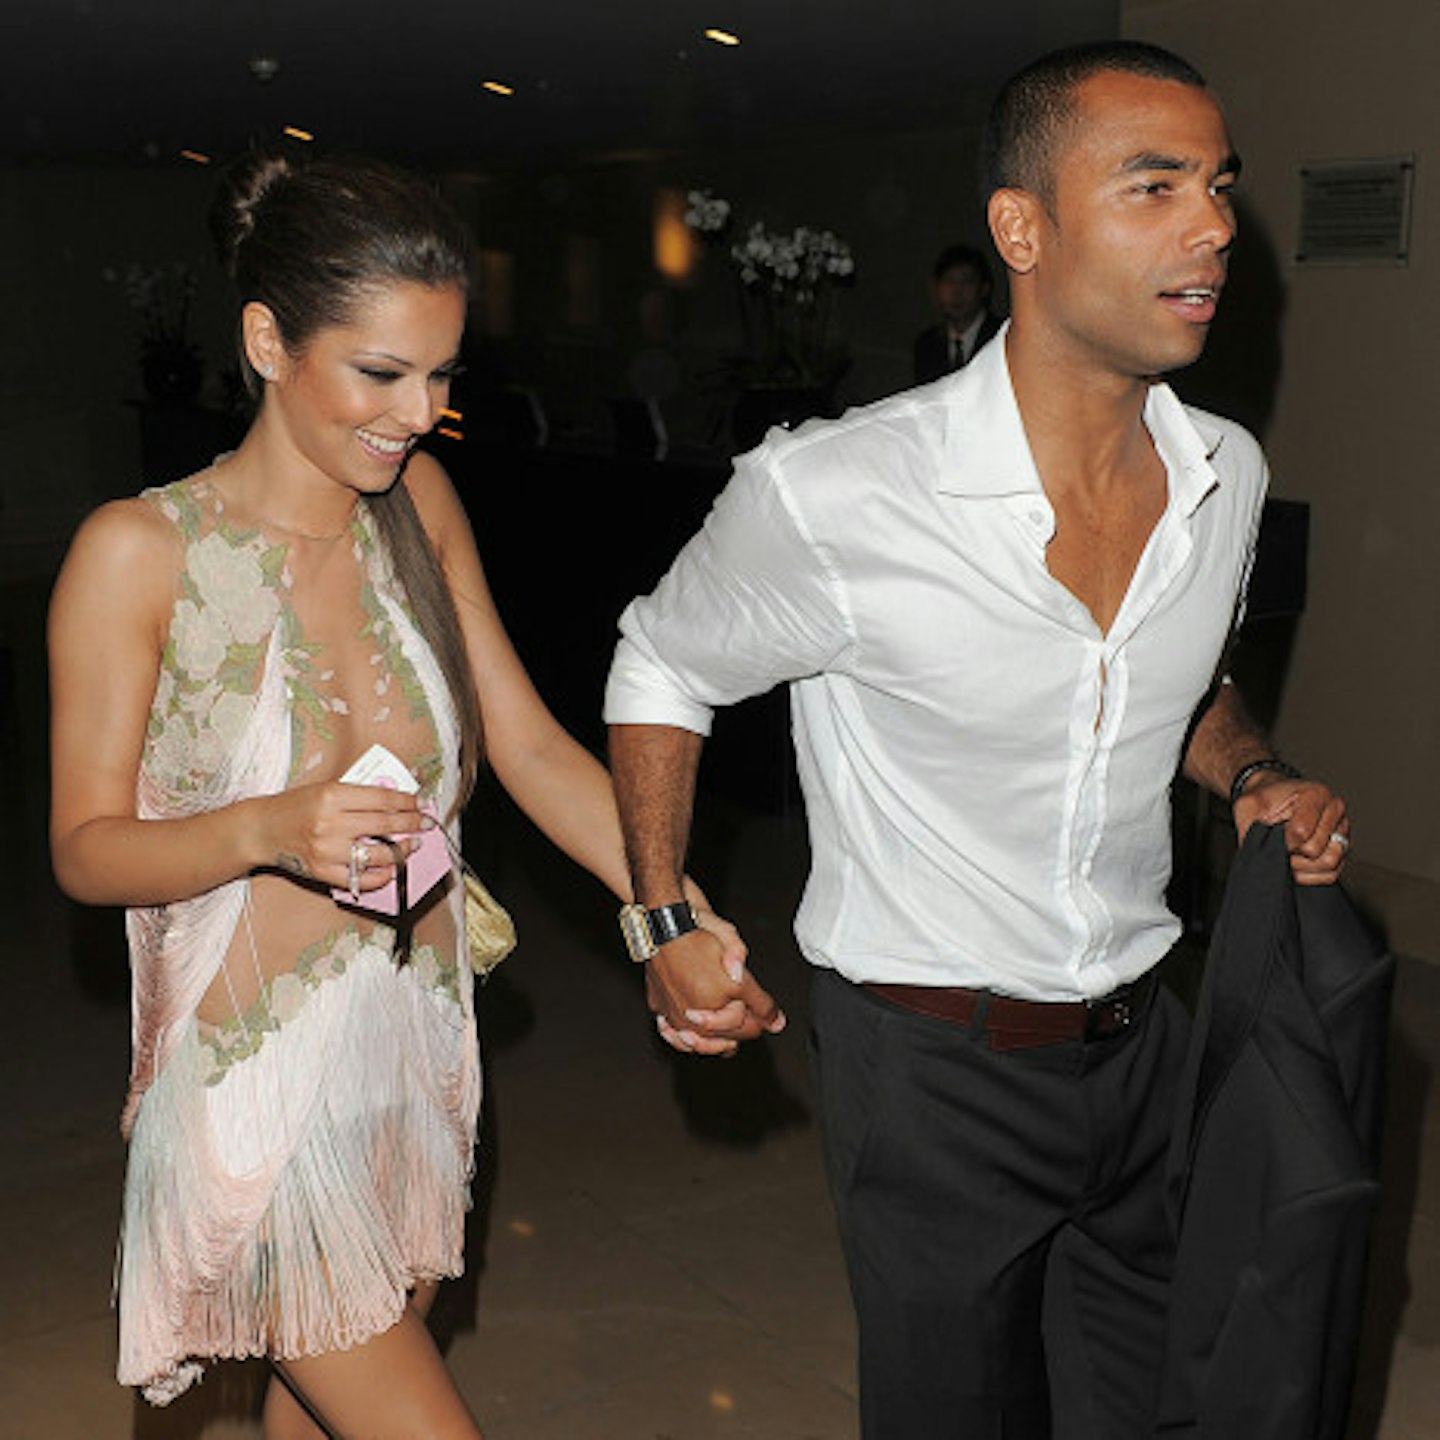 Cheryl and Ashley divorced in 2010 after multiple allegations of his infidelity